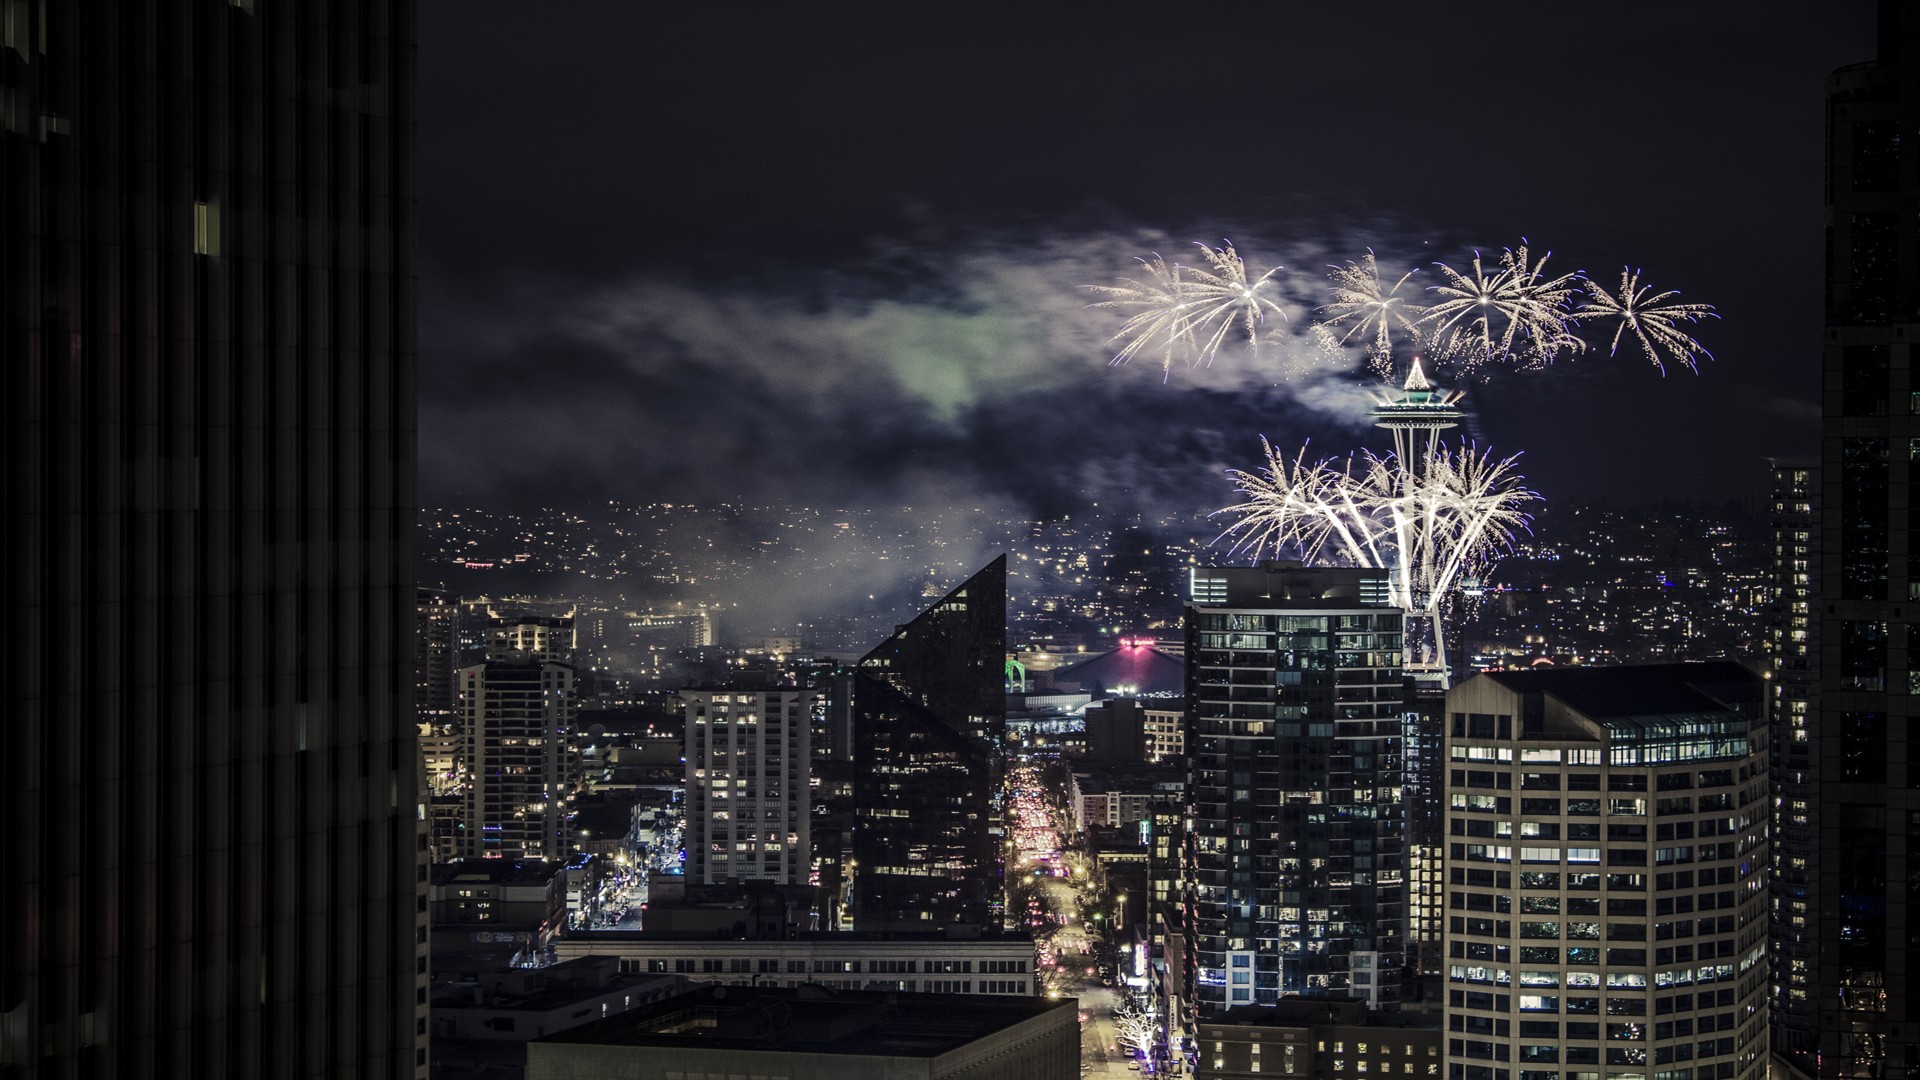 City Seattle Space Needle Fireworks Night 1920x1080